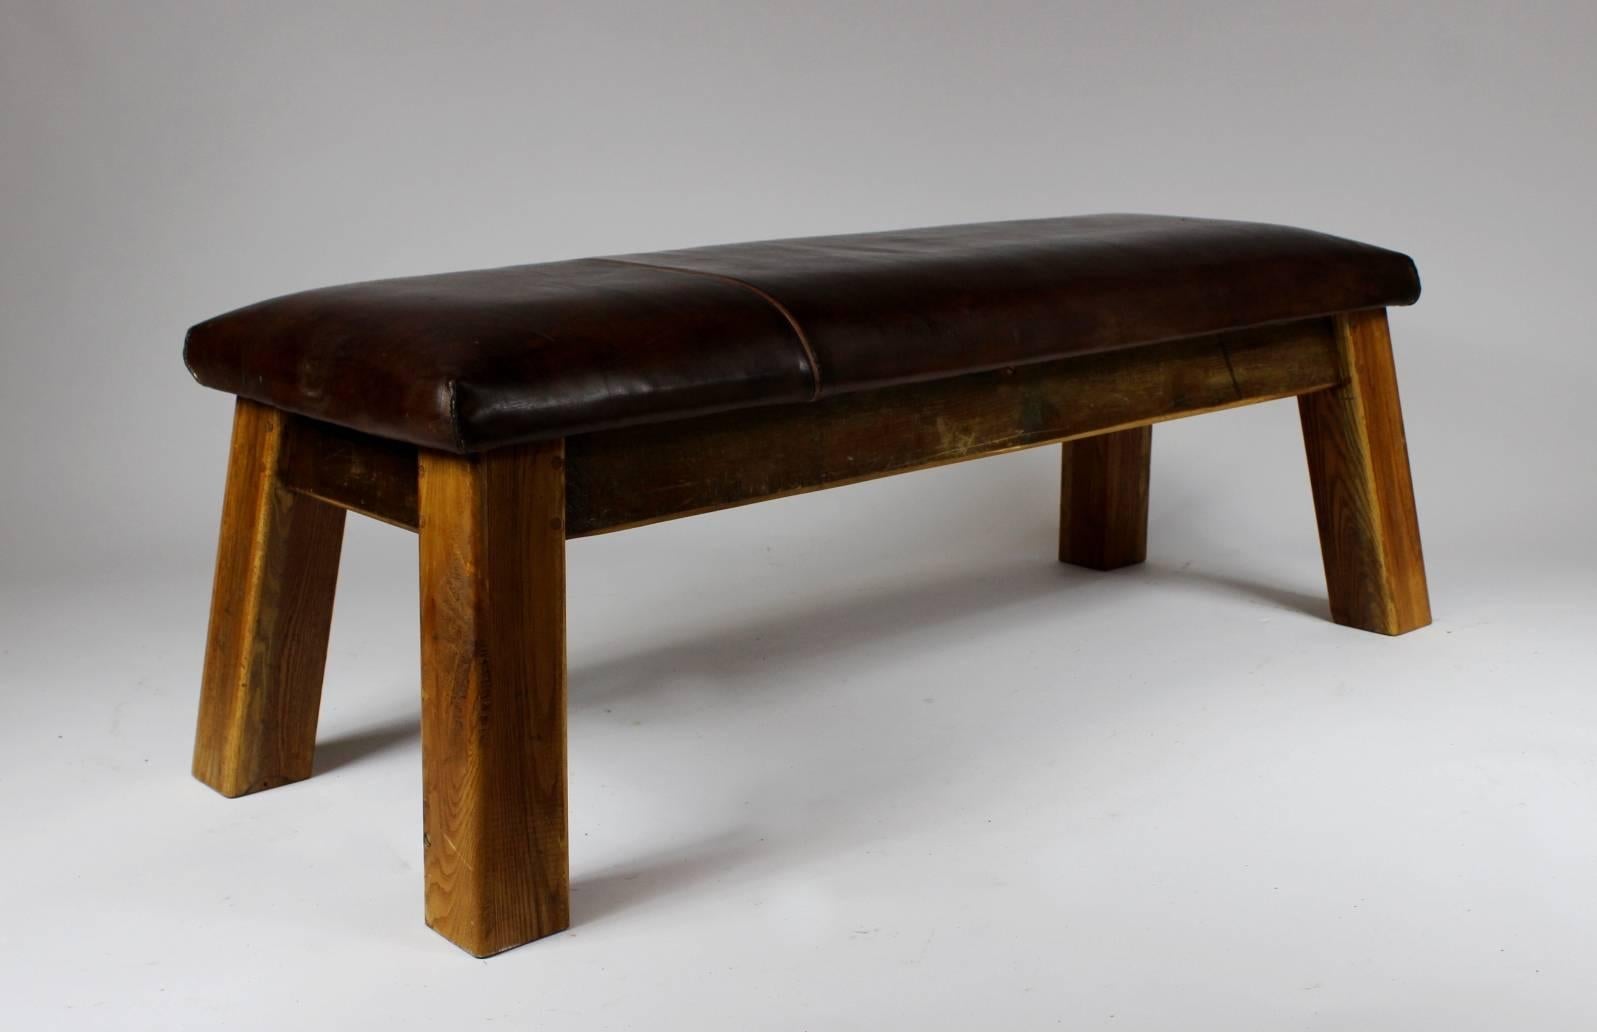 Leather gym bench from the 1930s. It is in its original condition with great patina.